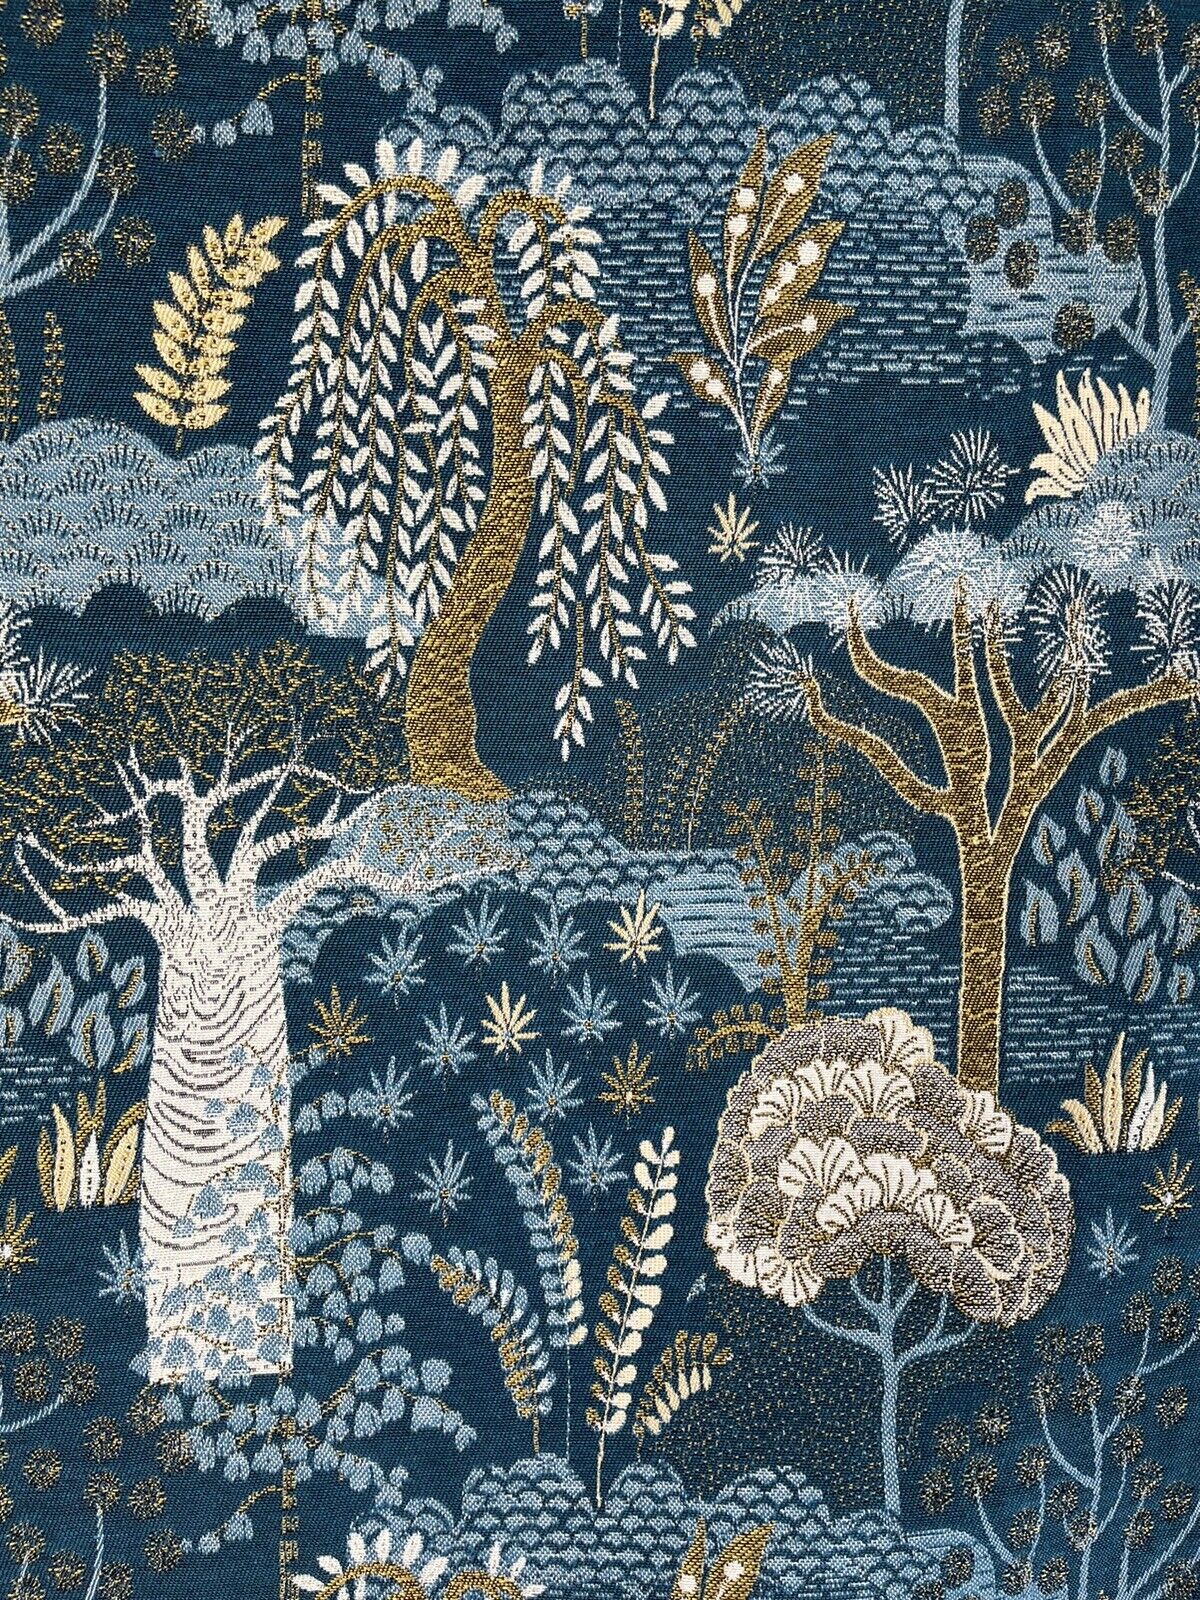 Baobab Tree of Life Botanical Blue Woven Tapestry Fabric Ideal for Upholstery, Sewing Projects